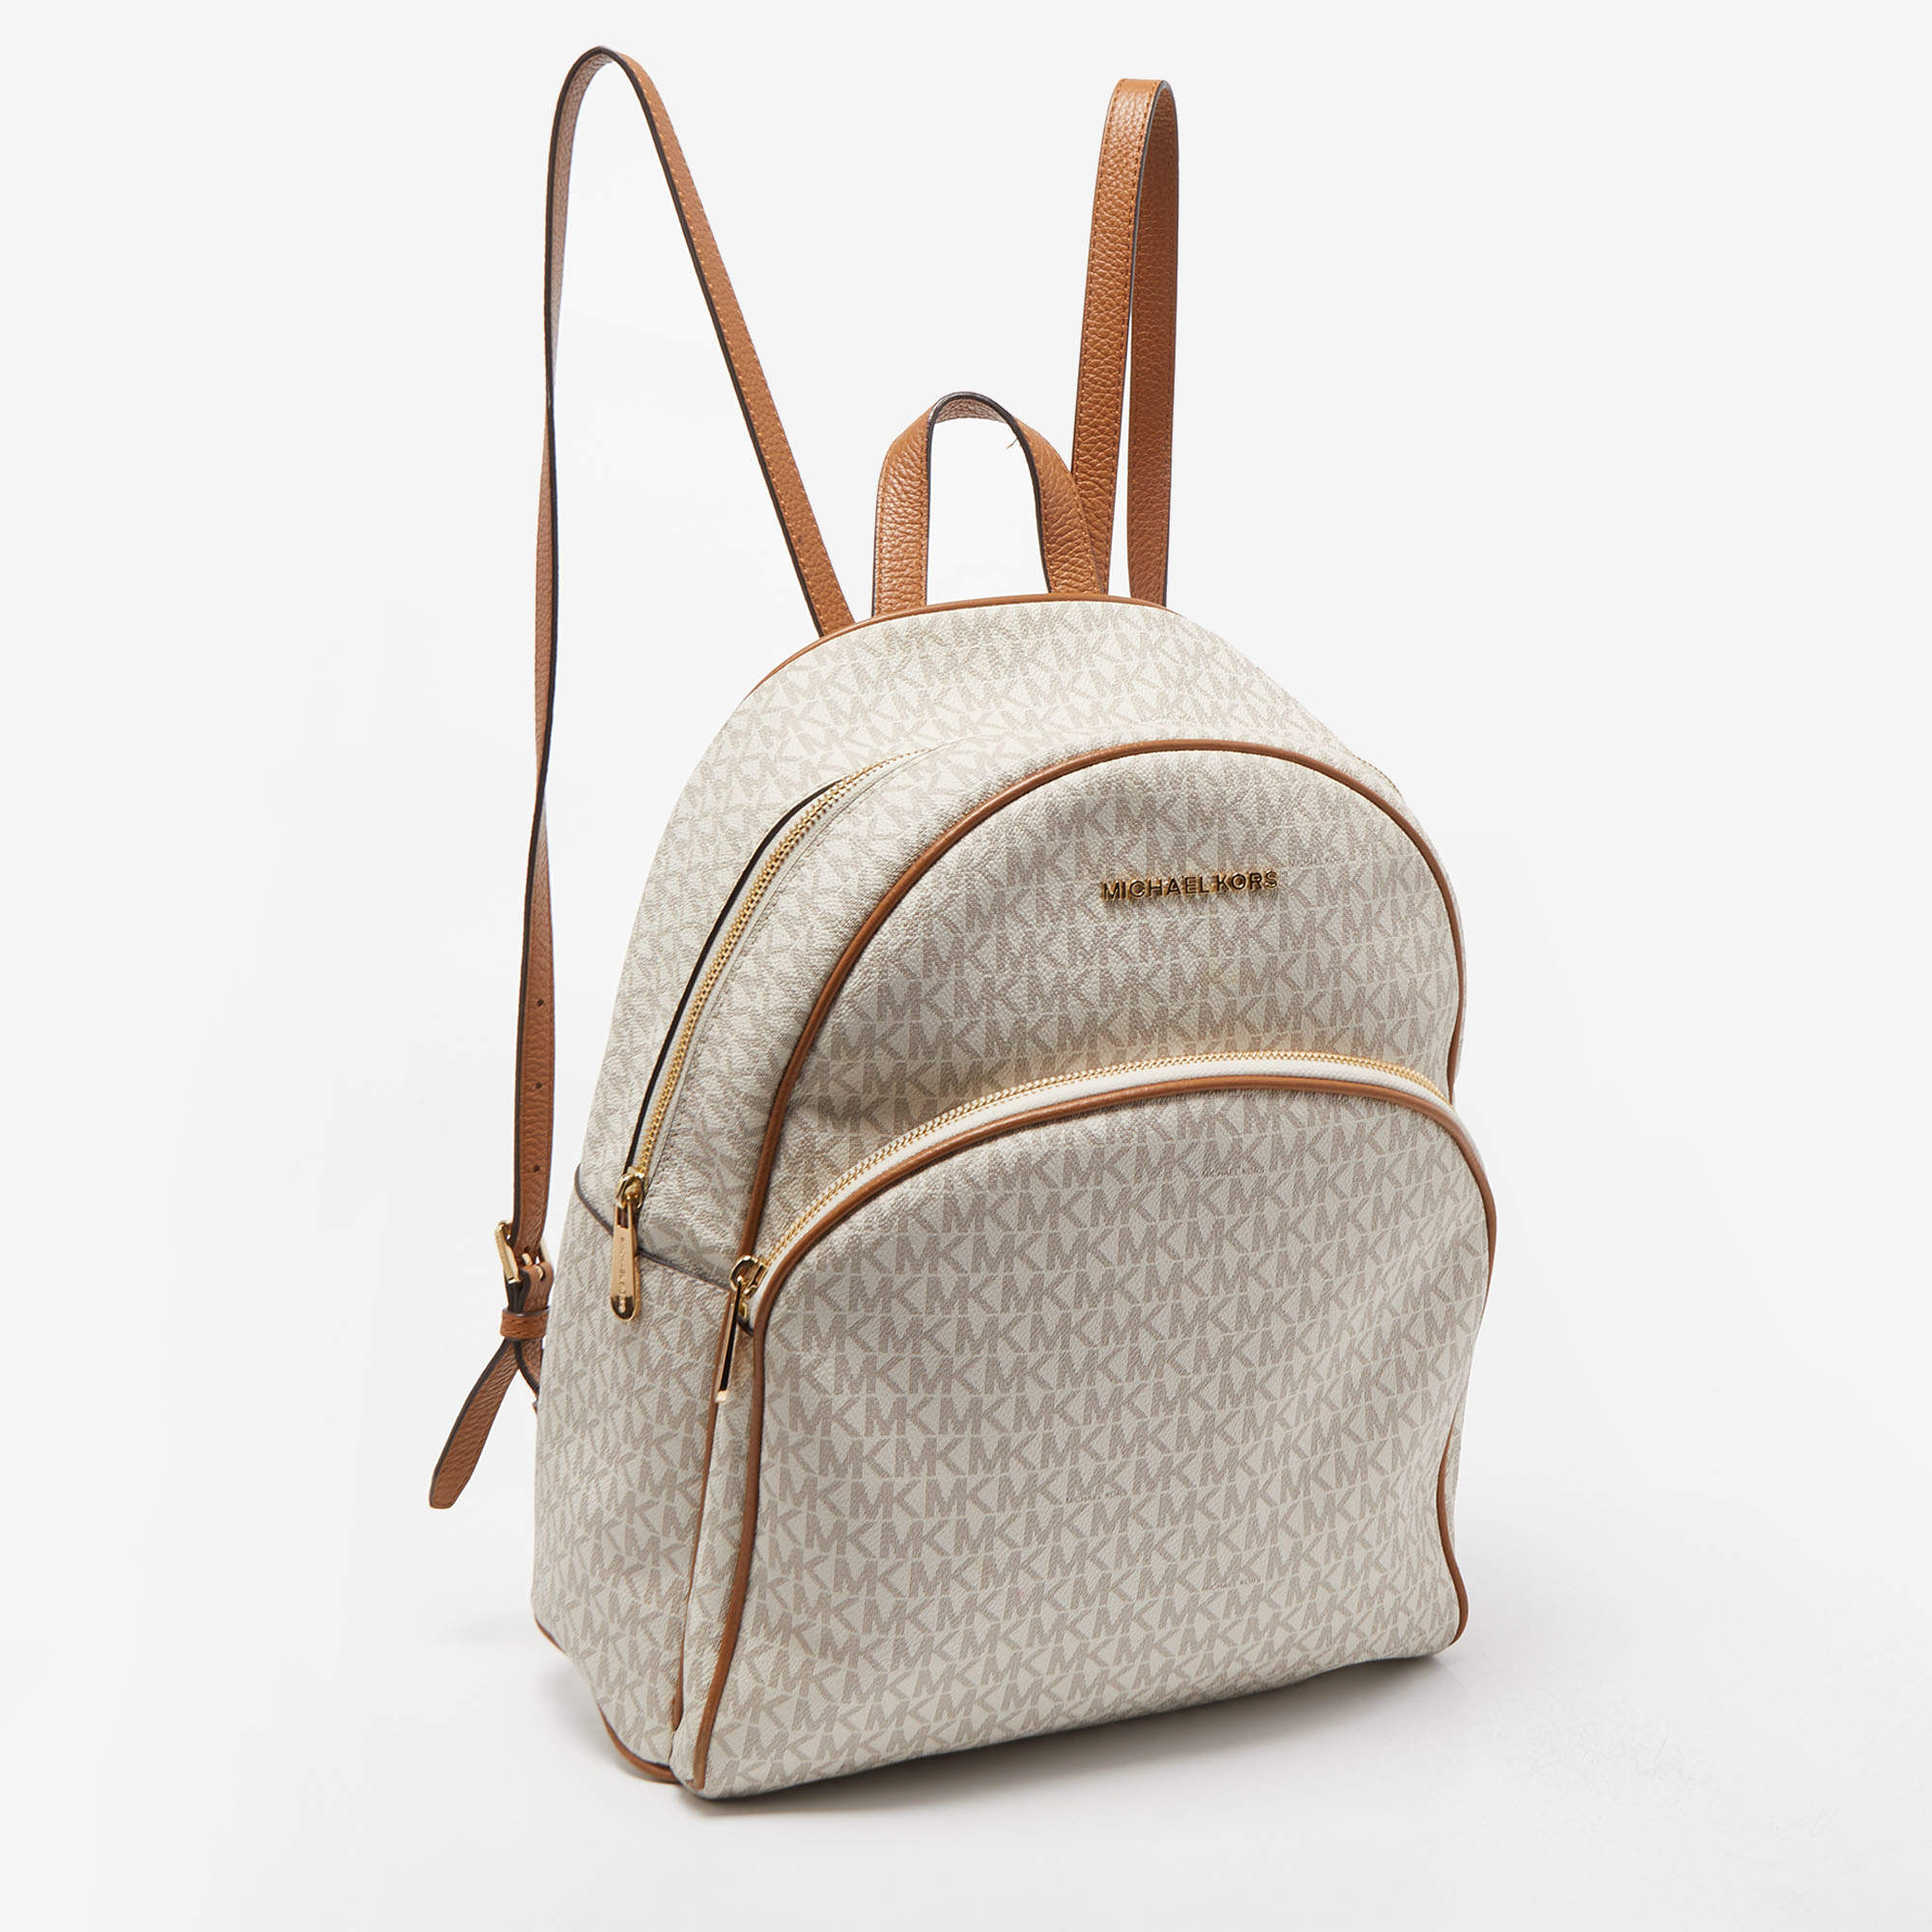 Cerebro Mierda Residencia Michael Kors Beige/Tan Signature Coated Canvas and Leather Abbey Backpack Michael  Kors | TLC